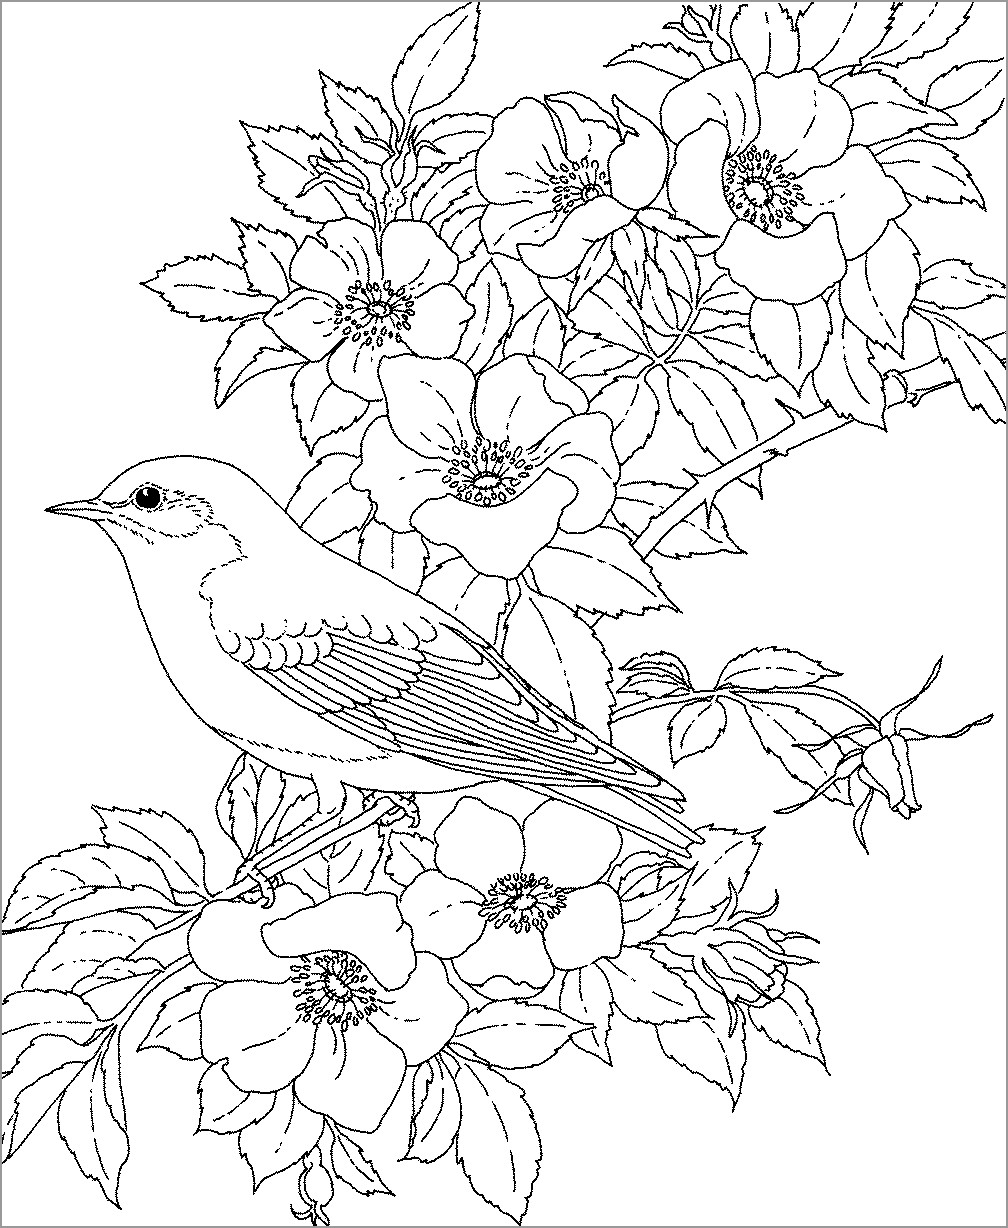 Flowers and Bluebird Coloring Page